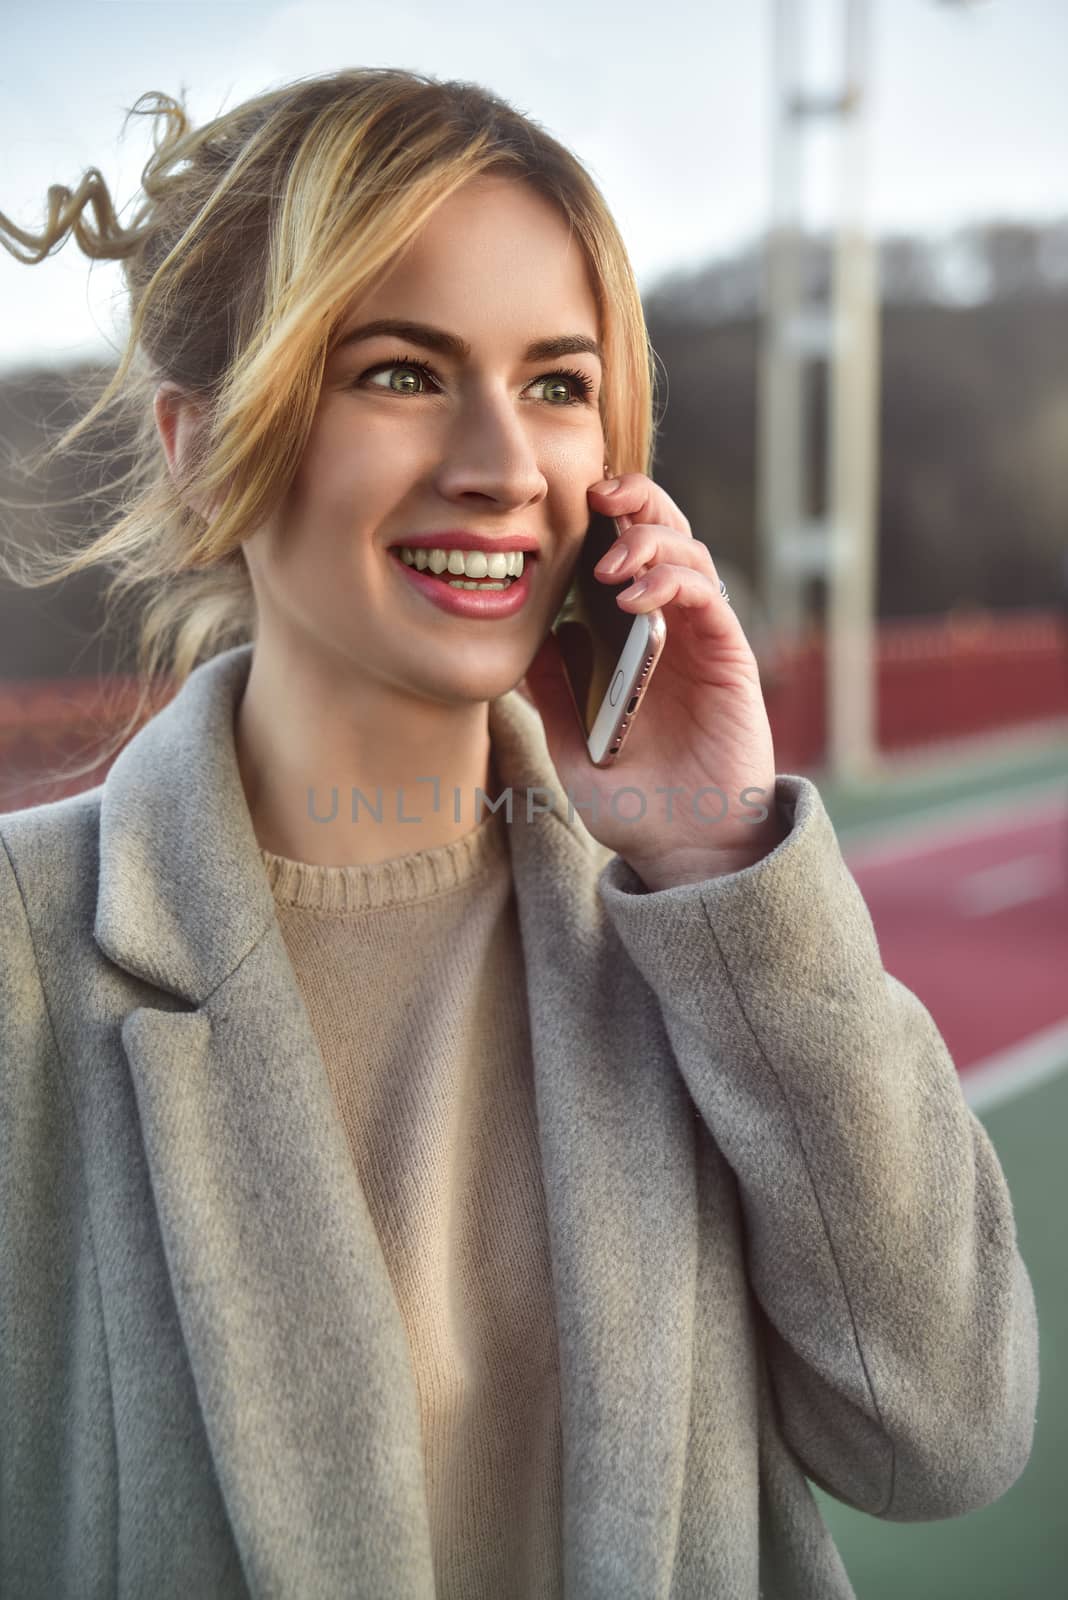 Cute smiling young woman talking on phone standing on the bride. Close up portrait